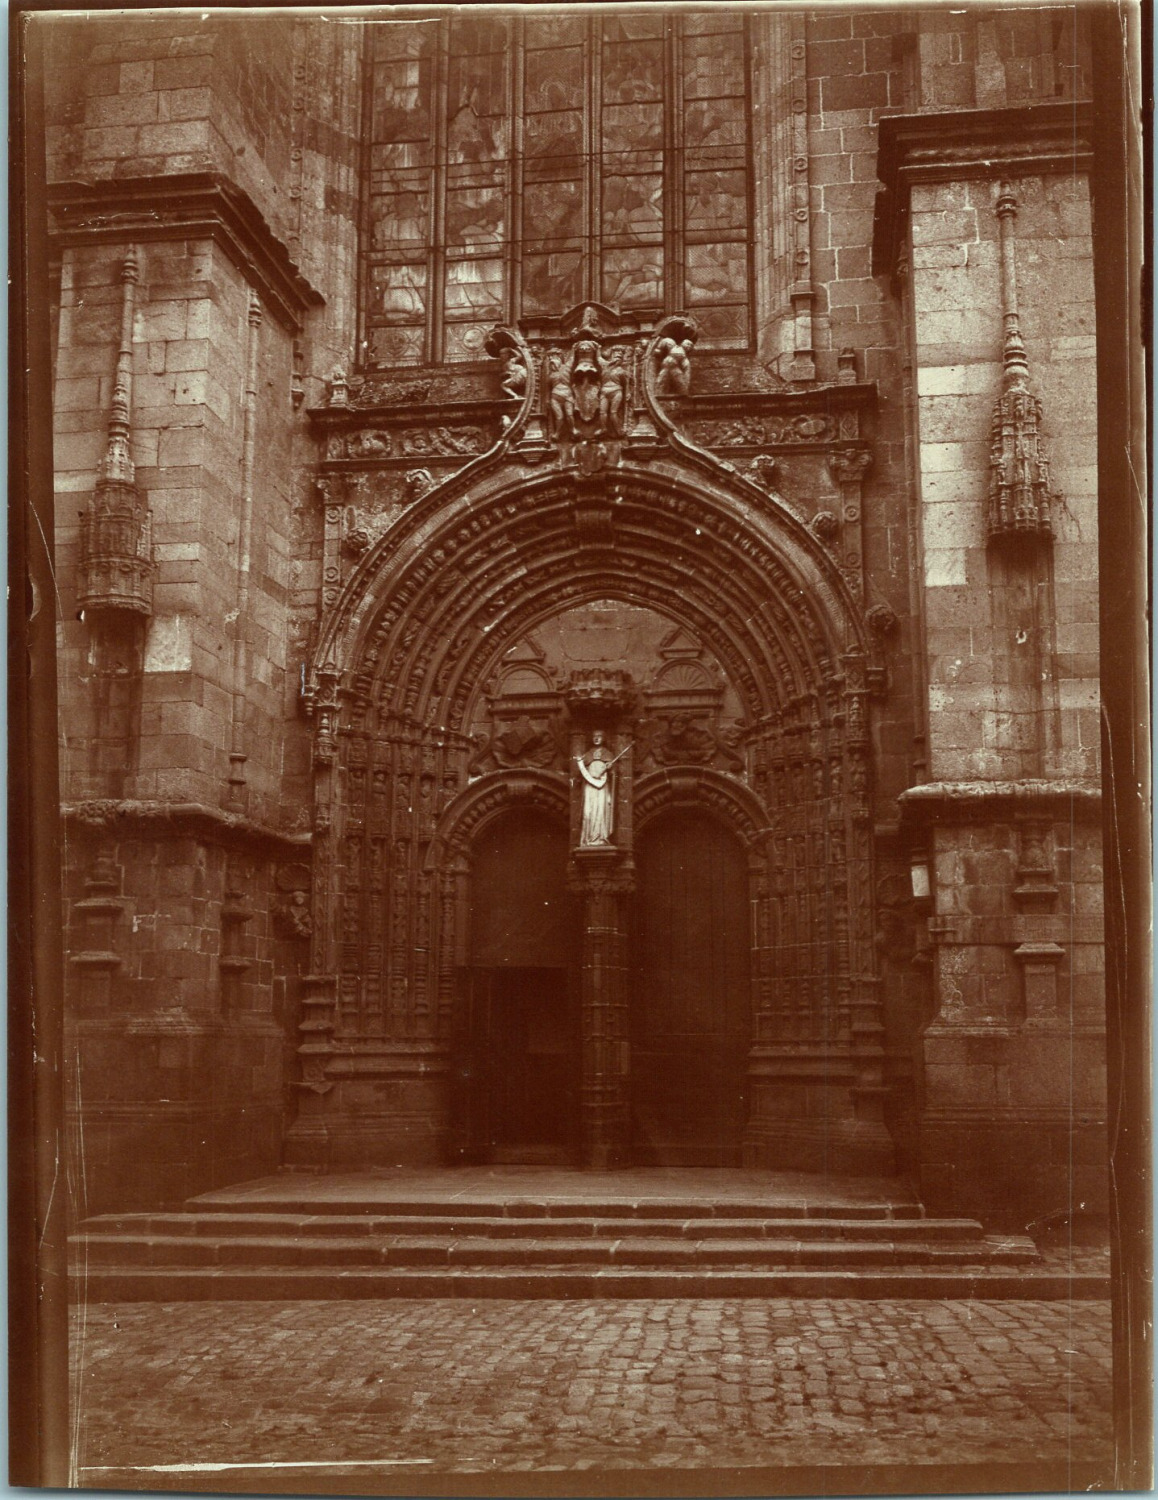 France, Guingamp, Interior View of Notre-Dame Basilica and Ancienne Poste, V